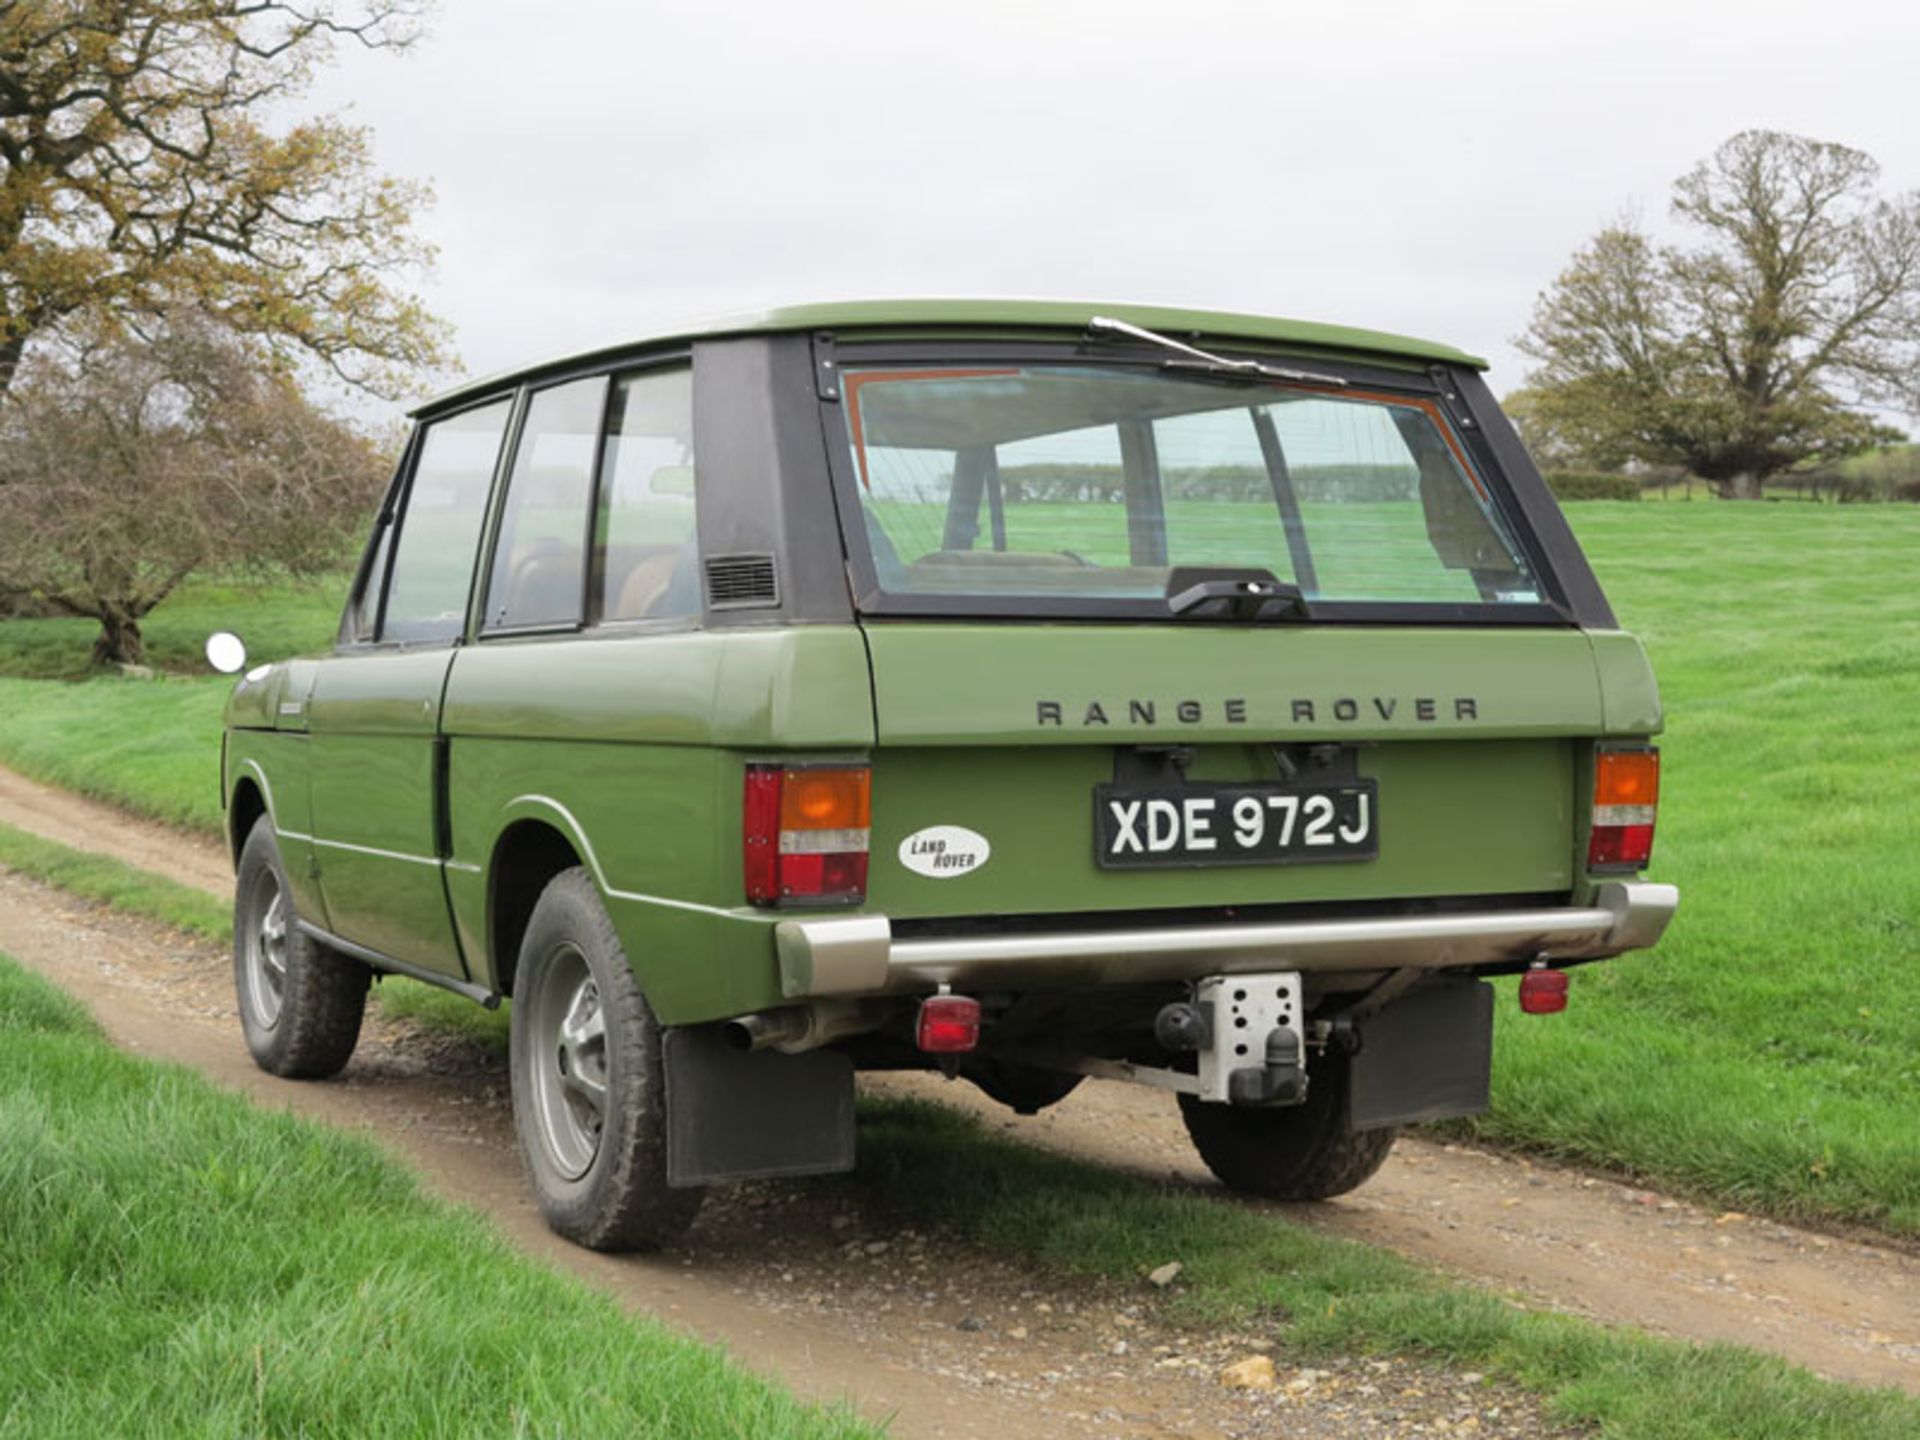 - Rare and desirable 'Suffix A' Range Rover

- 1 of 2,844 Home Market RHD cars built during the 1971 - Image 3 of 16